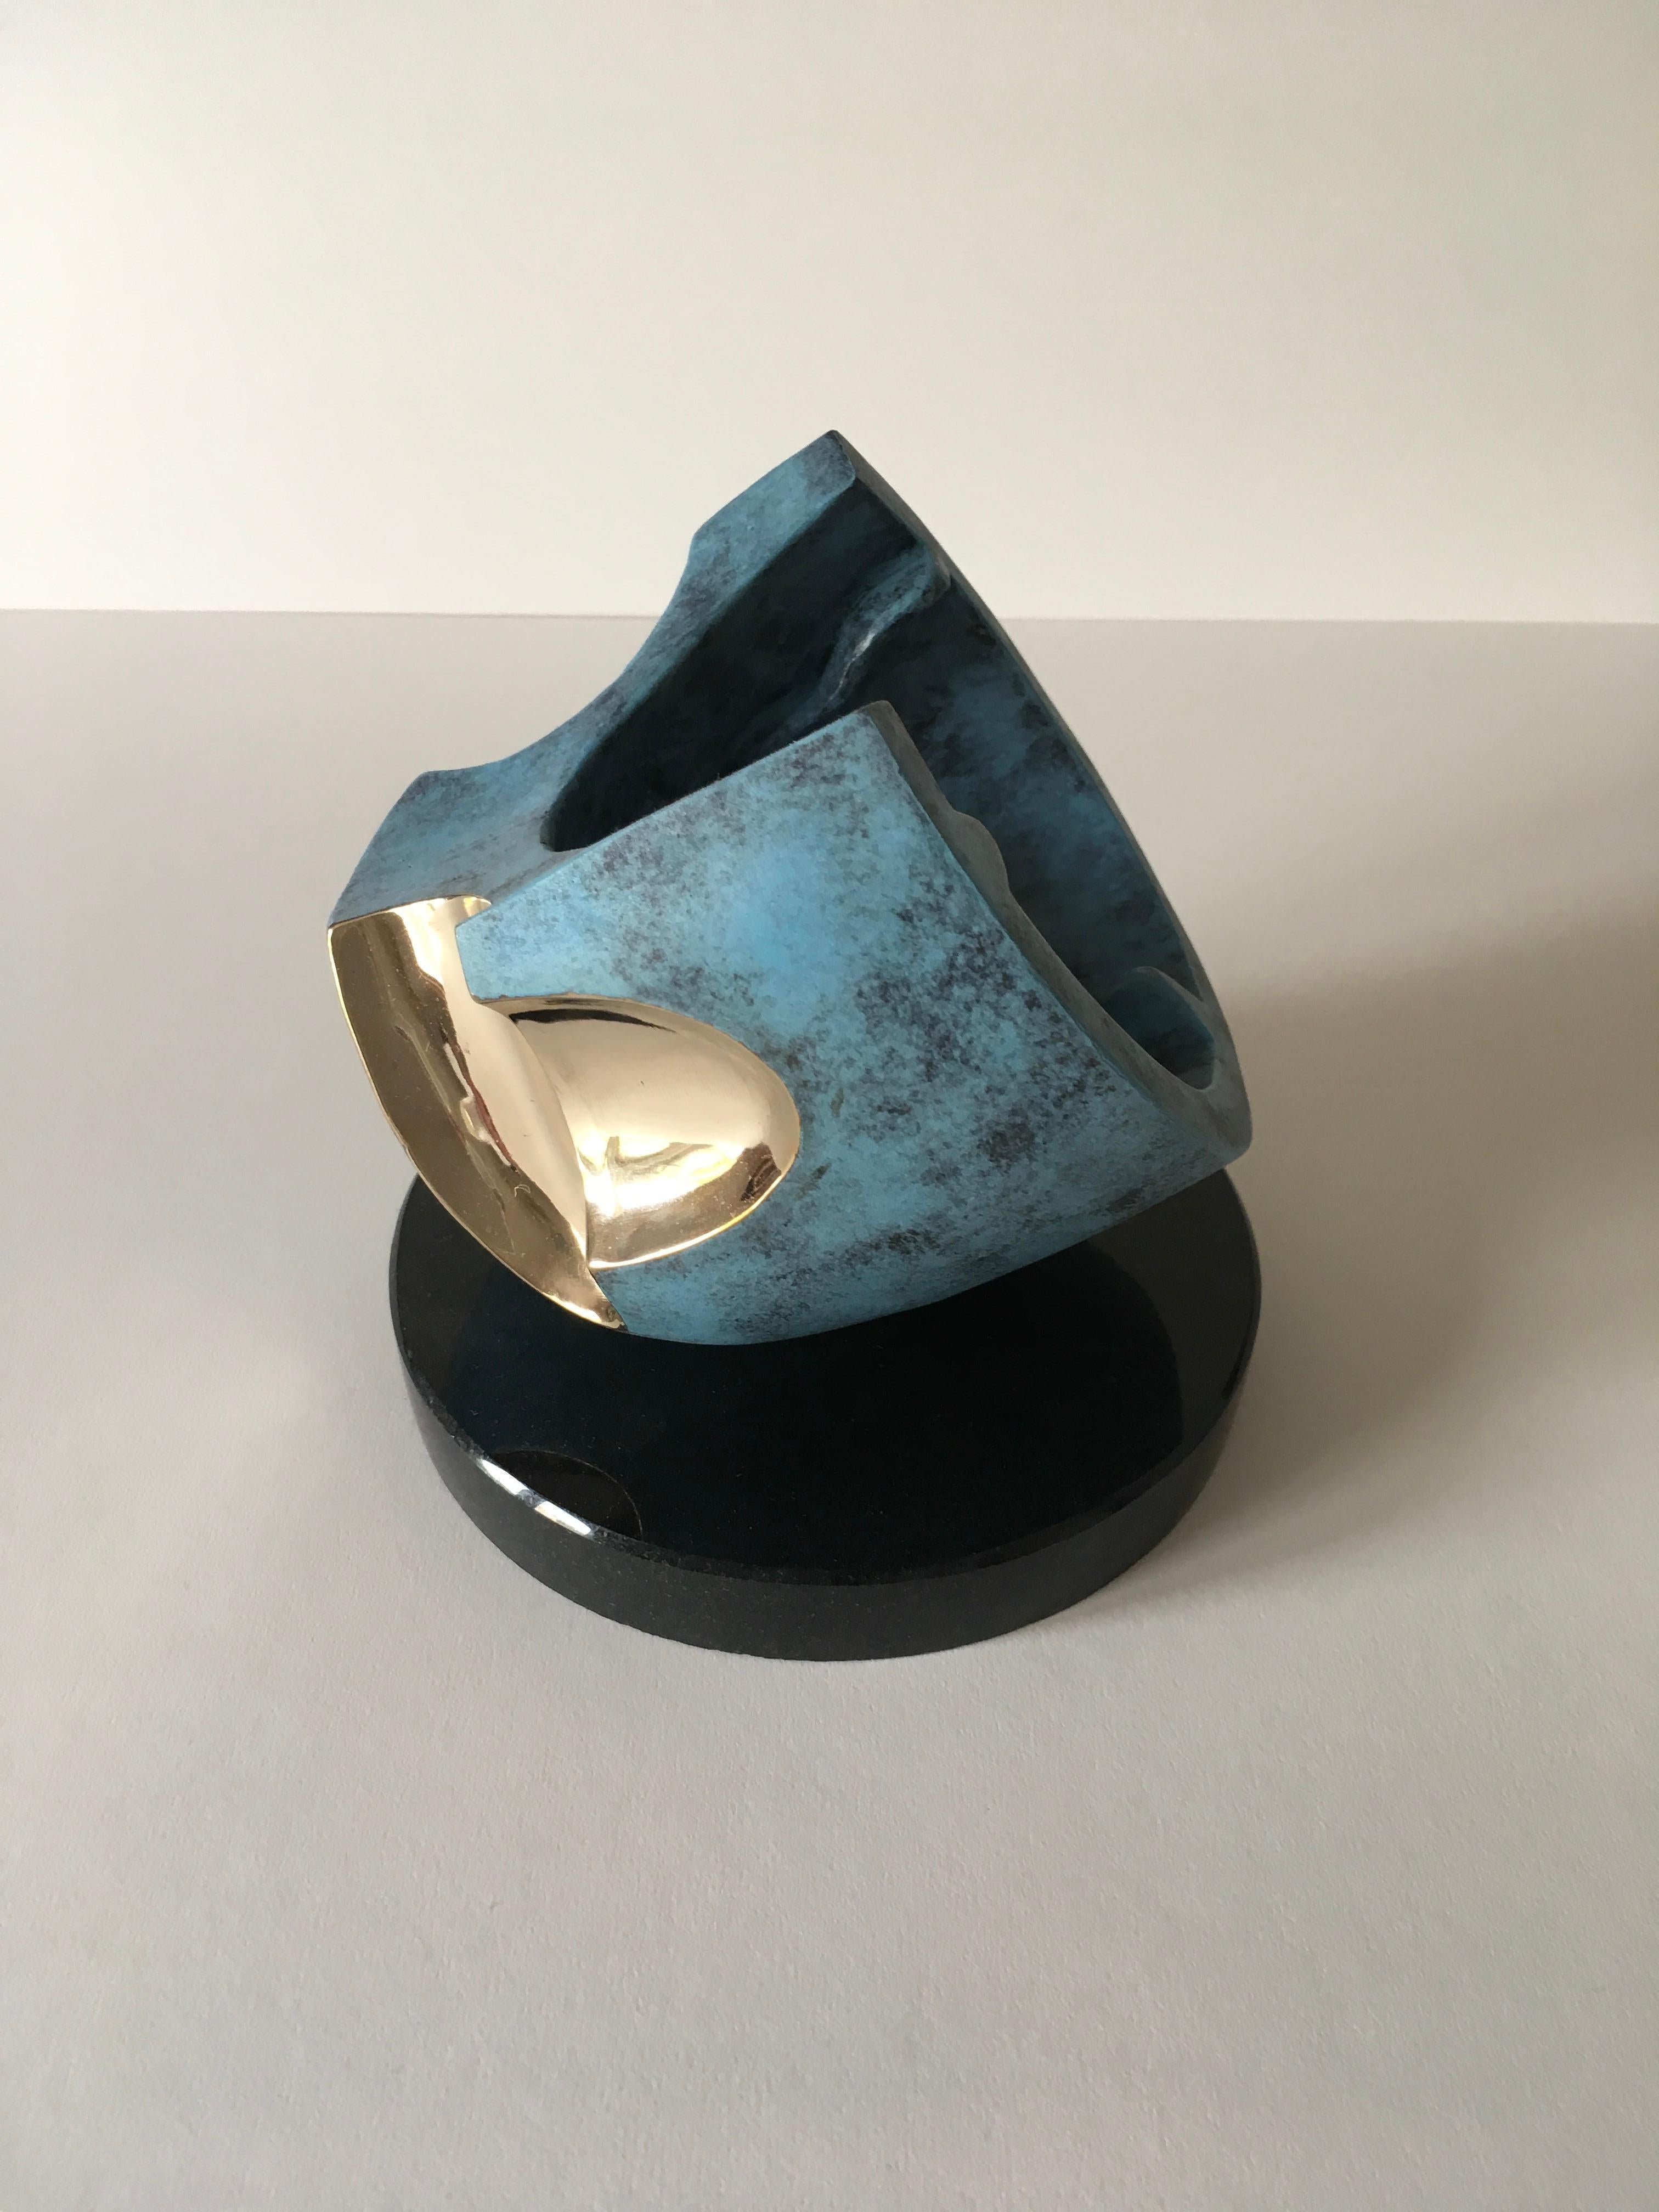 Cupped Hollow  - Tabletop limited edition sculpture Bronze  - Sculpture by David Sprakes